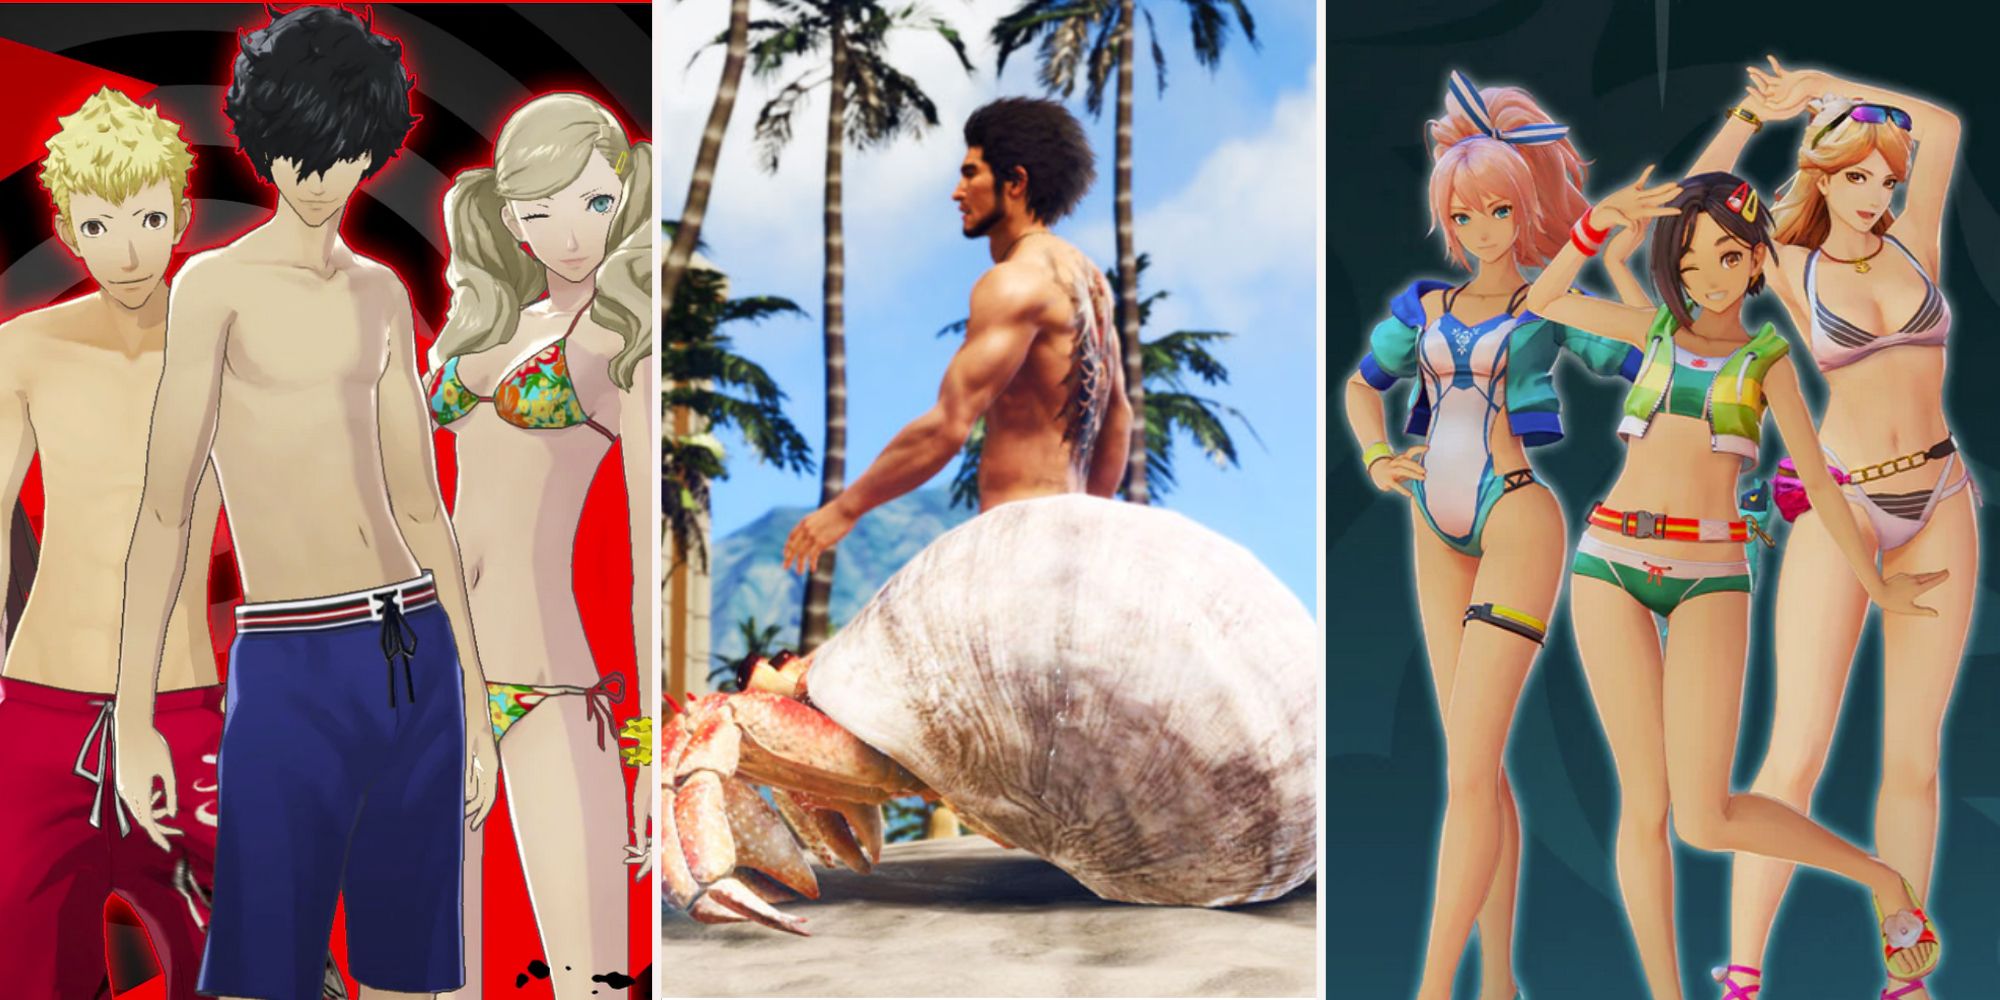 Three charactes from Persona 5, the protagonist of Like a Dragon, and three characters from Tales of Arise are in swimwear.